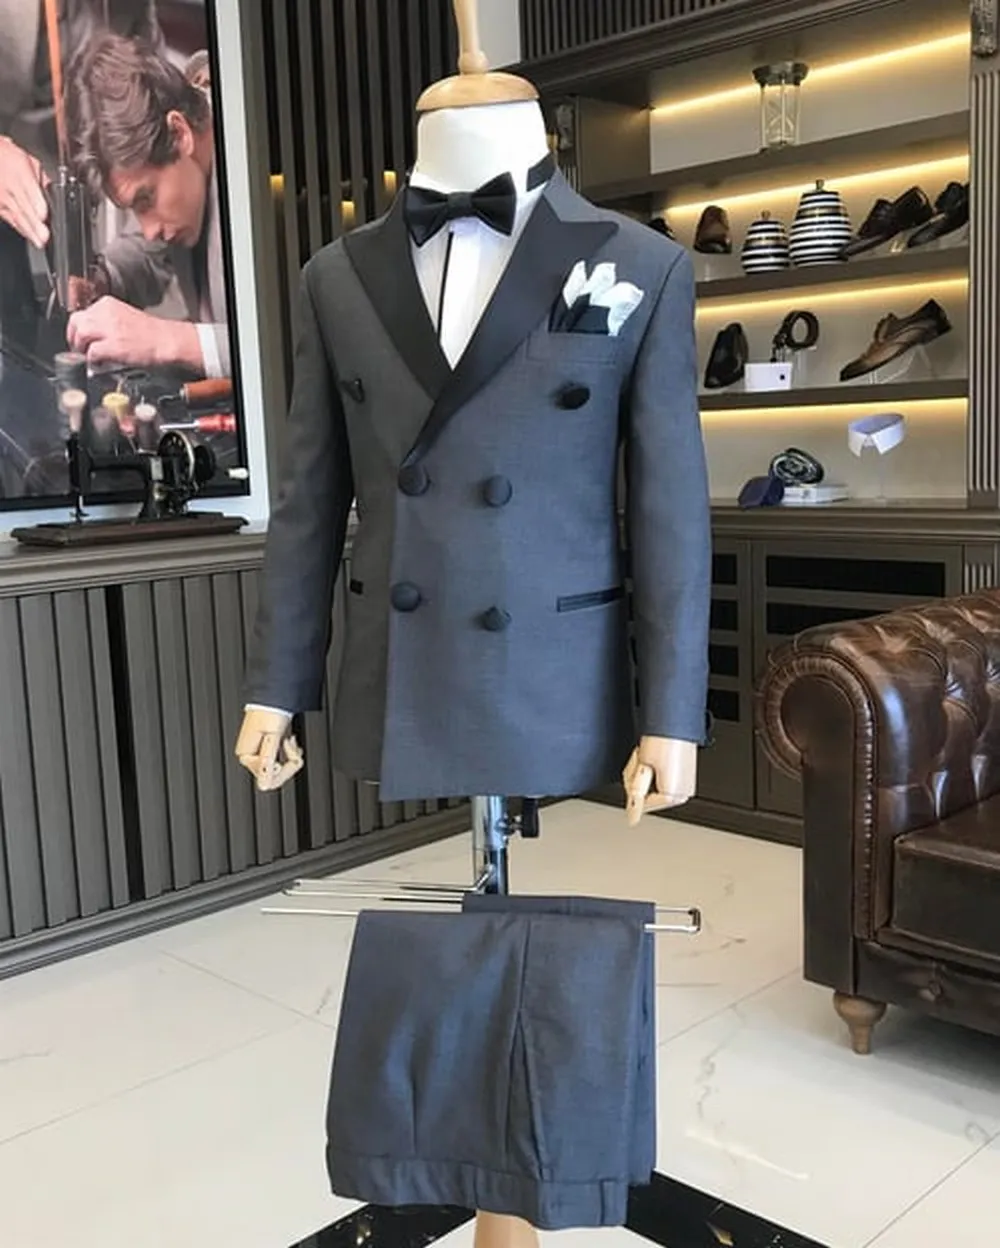 New Kind Toddler Boy's Suits Formal Occasion 2-piece Set Wedding Party Prom Birthday Performance Children Tuxedo Jacket Pants A5